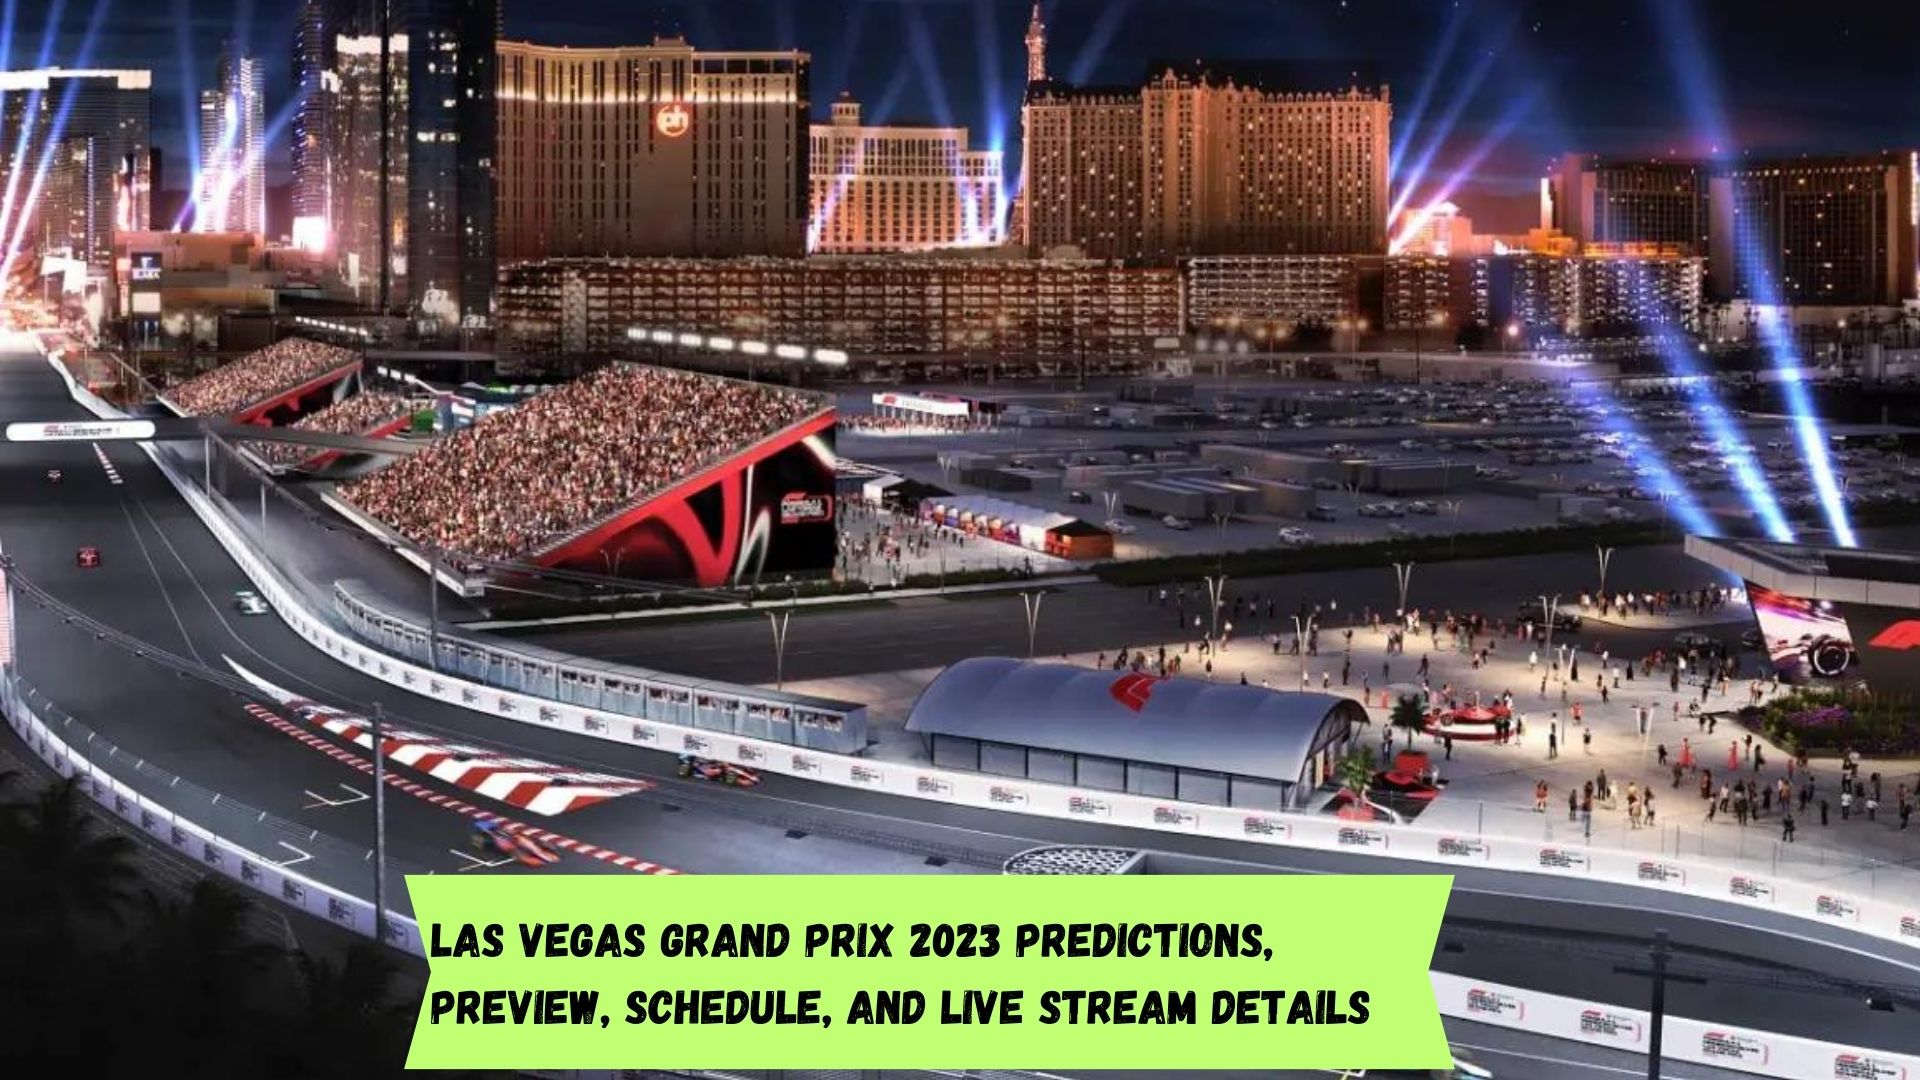 Las Vegas Grand Prix 2023 Predictions Preview Schedule And Live Stream Details 